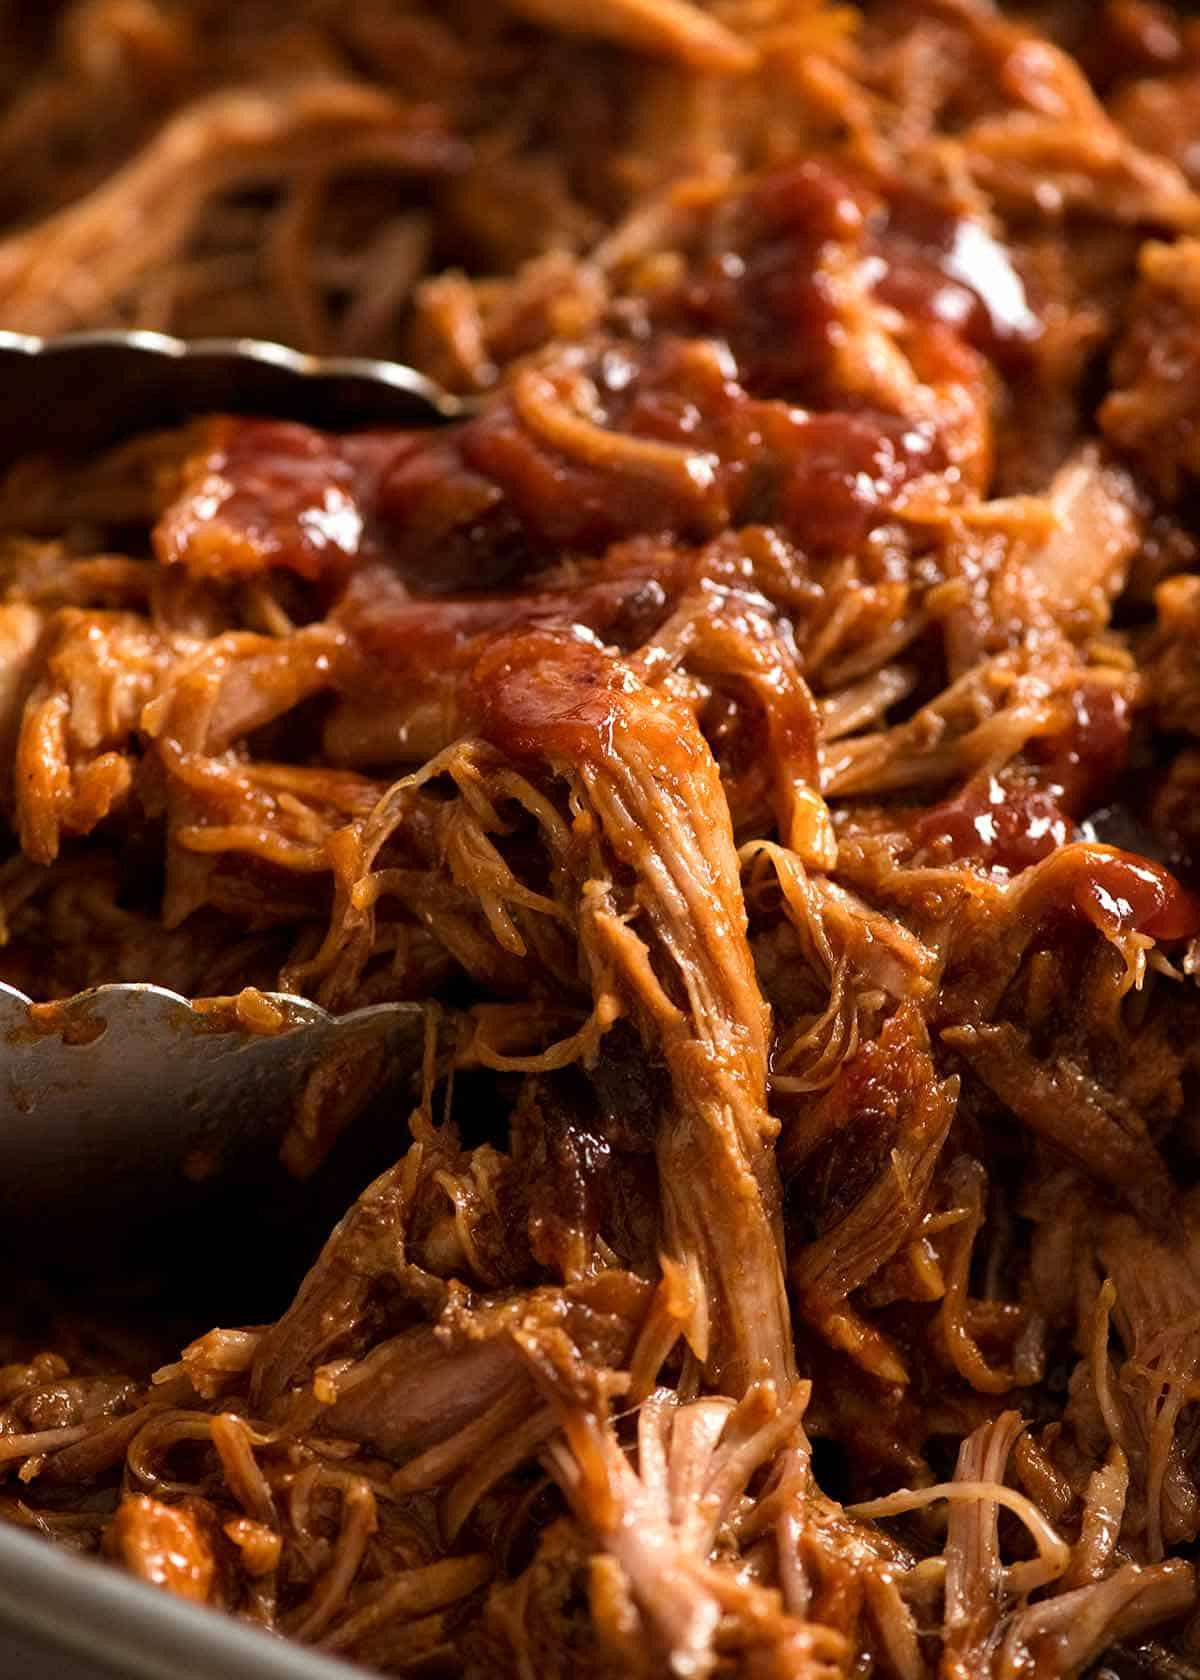 Bbq Sauce For Pulled Pork
 Pulled Pork with BBQ Sauce